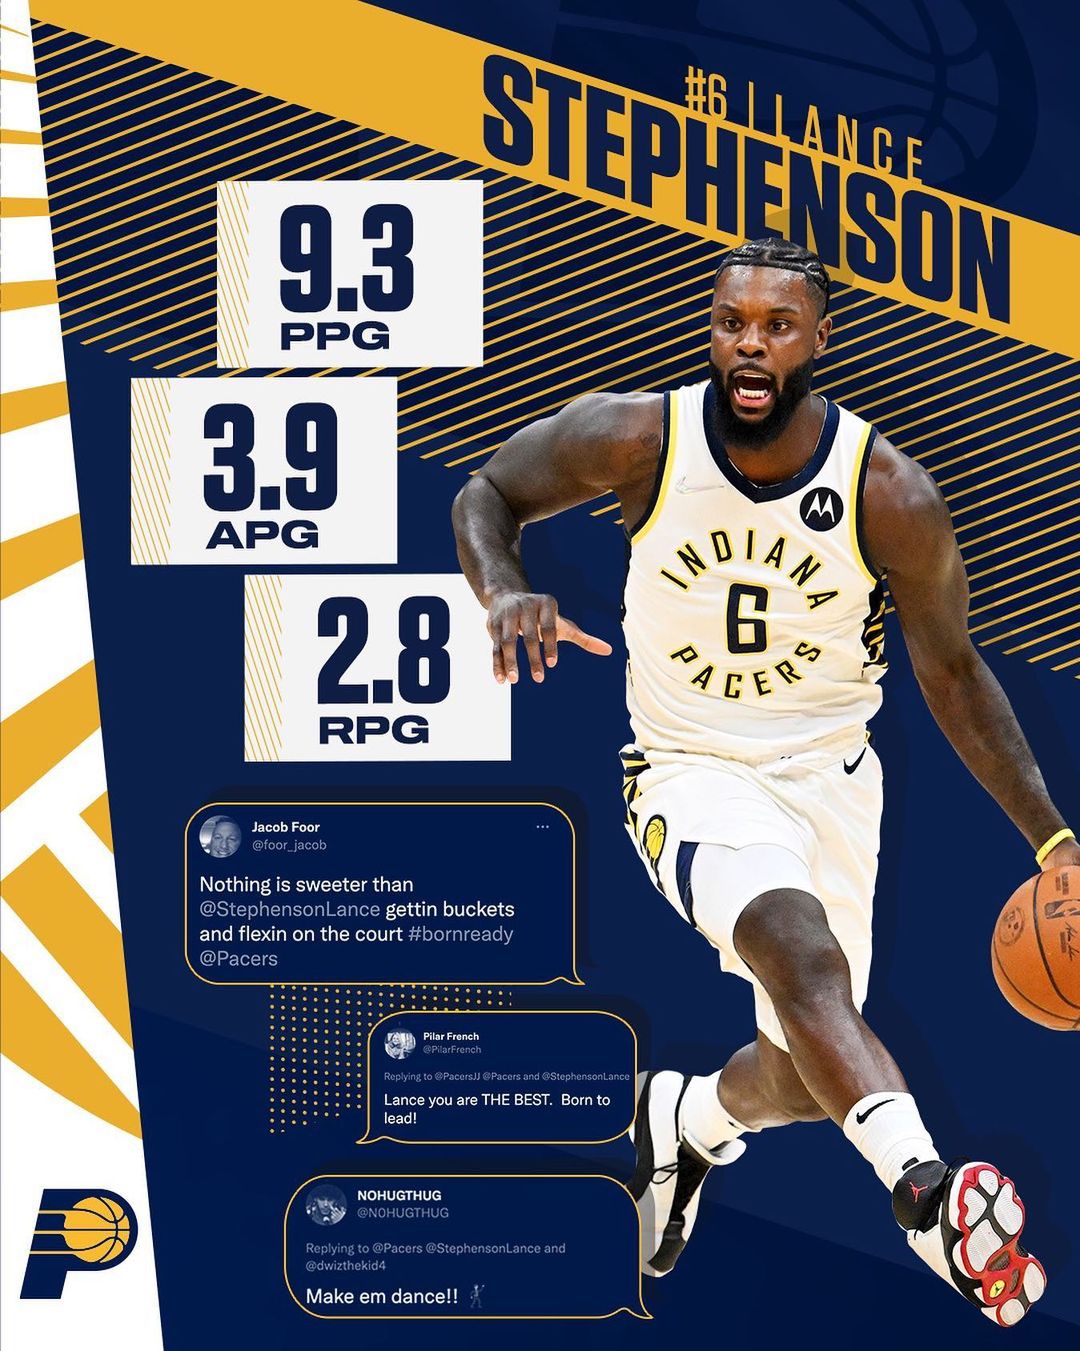 @stephensonlance became the first player in NBA history to score 20 points off t...